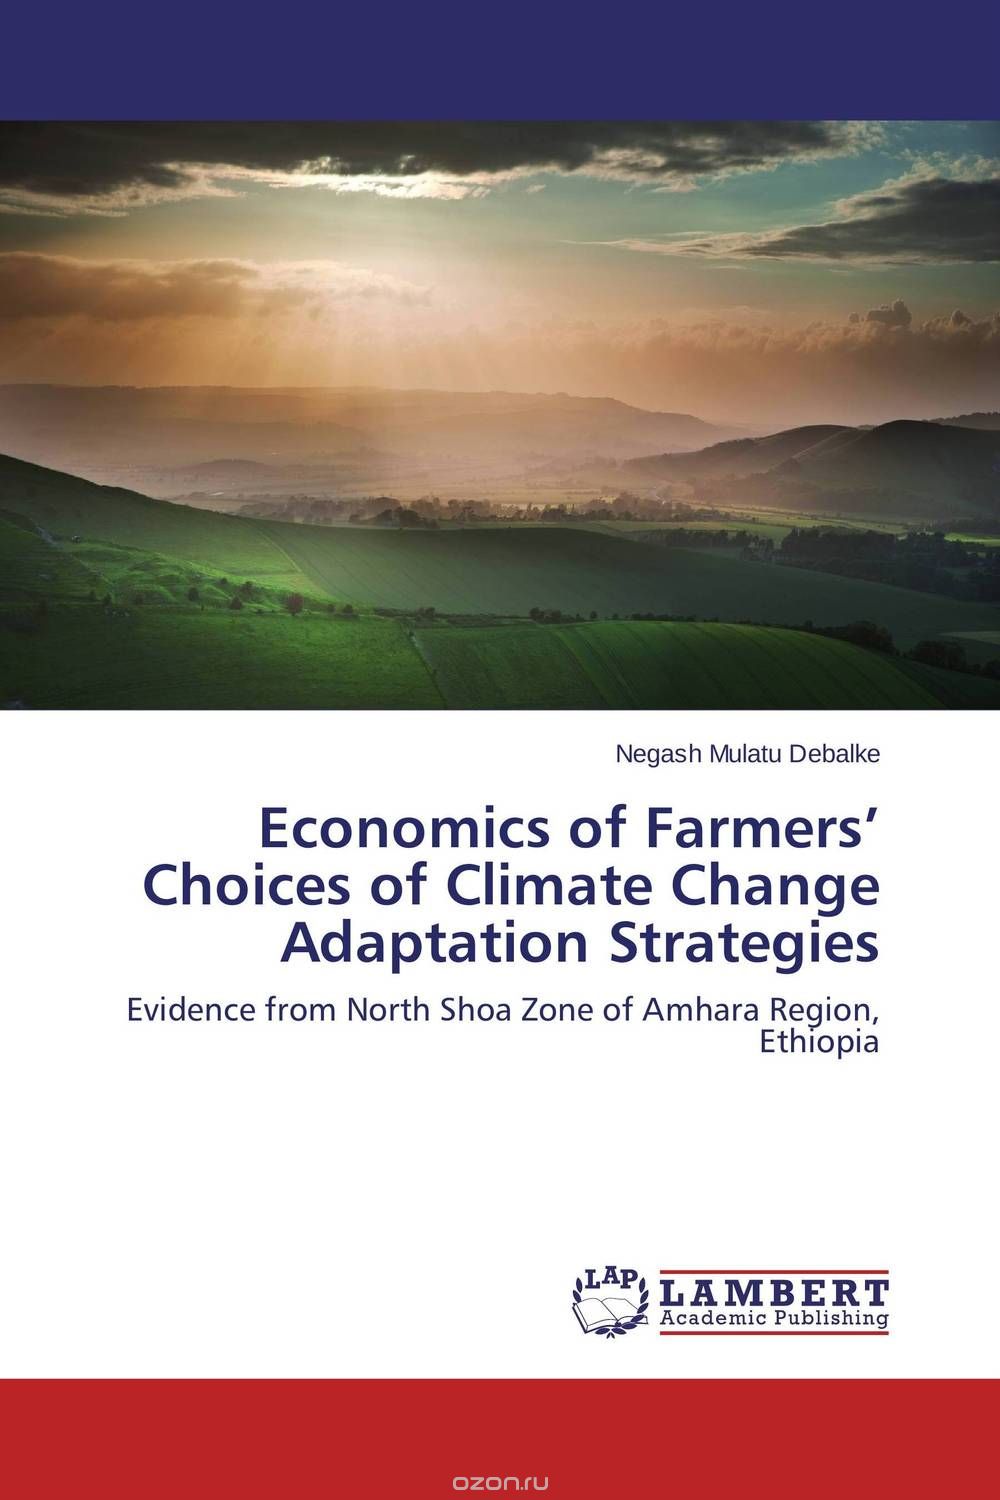 Economics of Farmers’ Choices of Climate Change Adaptation Strategies